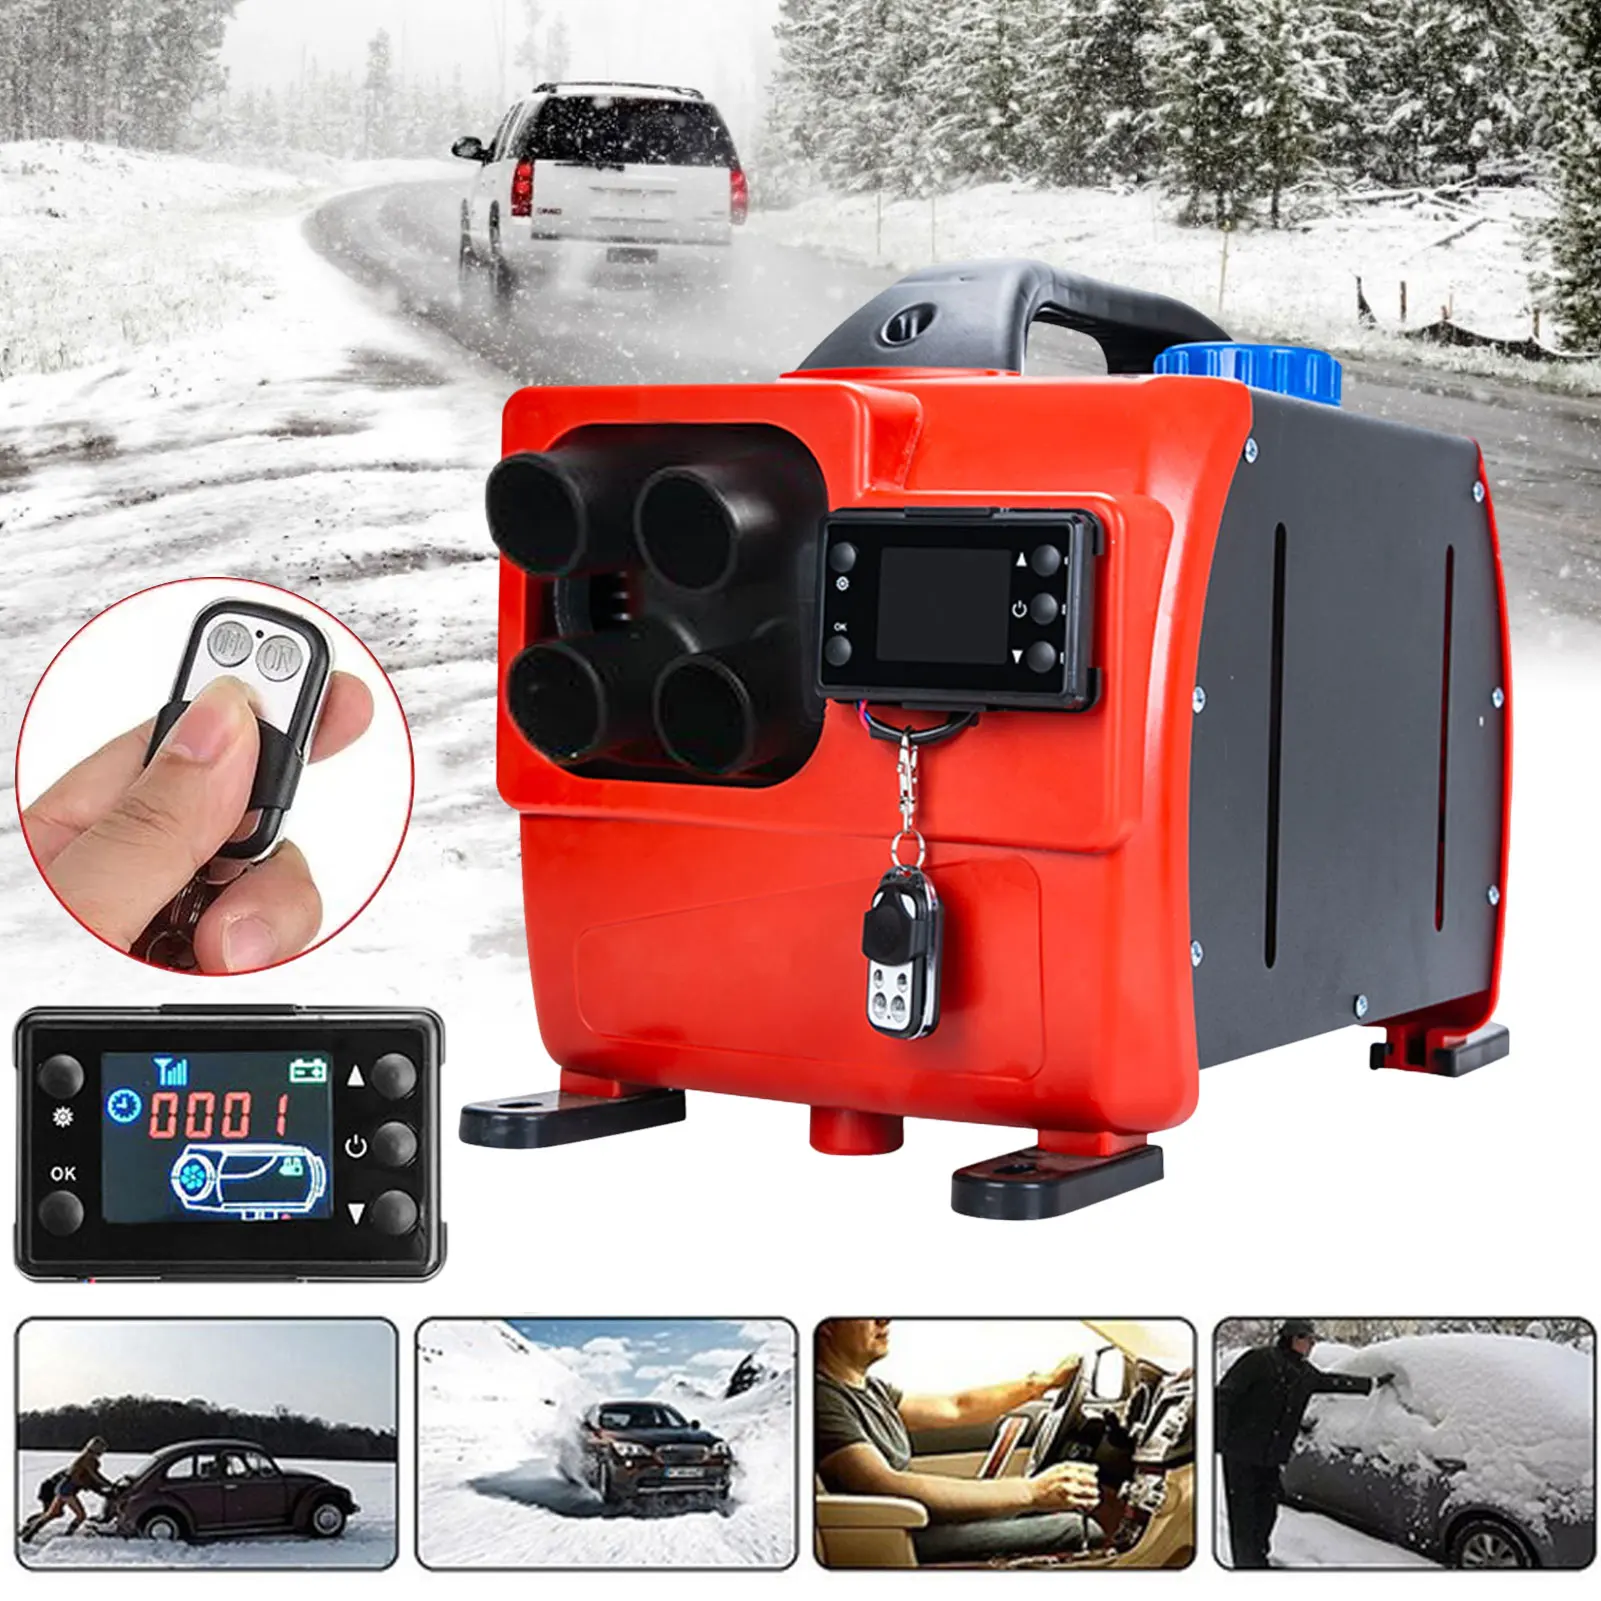 

8KW 12V 24V Car Diesel Heater Without Turning On The Engine Air Vehicle 4 Holes Parking LCD Switch Monitor Display Fan Trucks